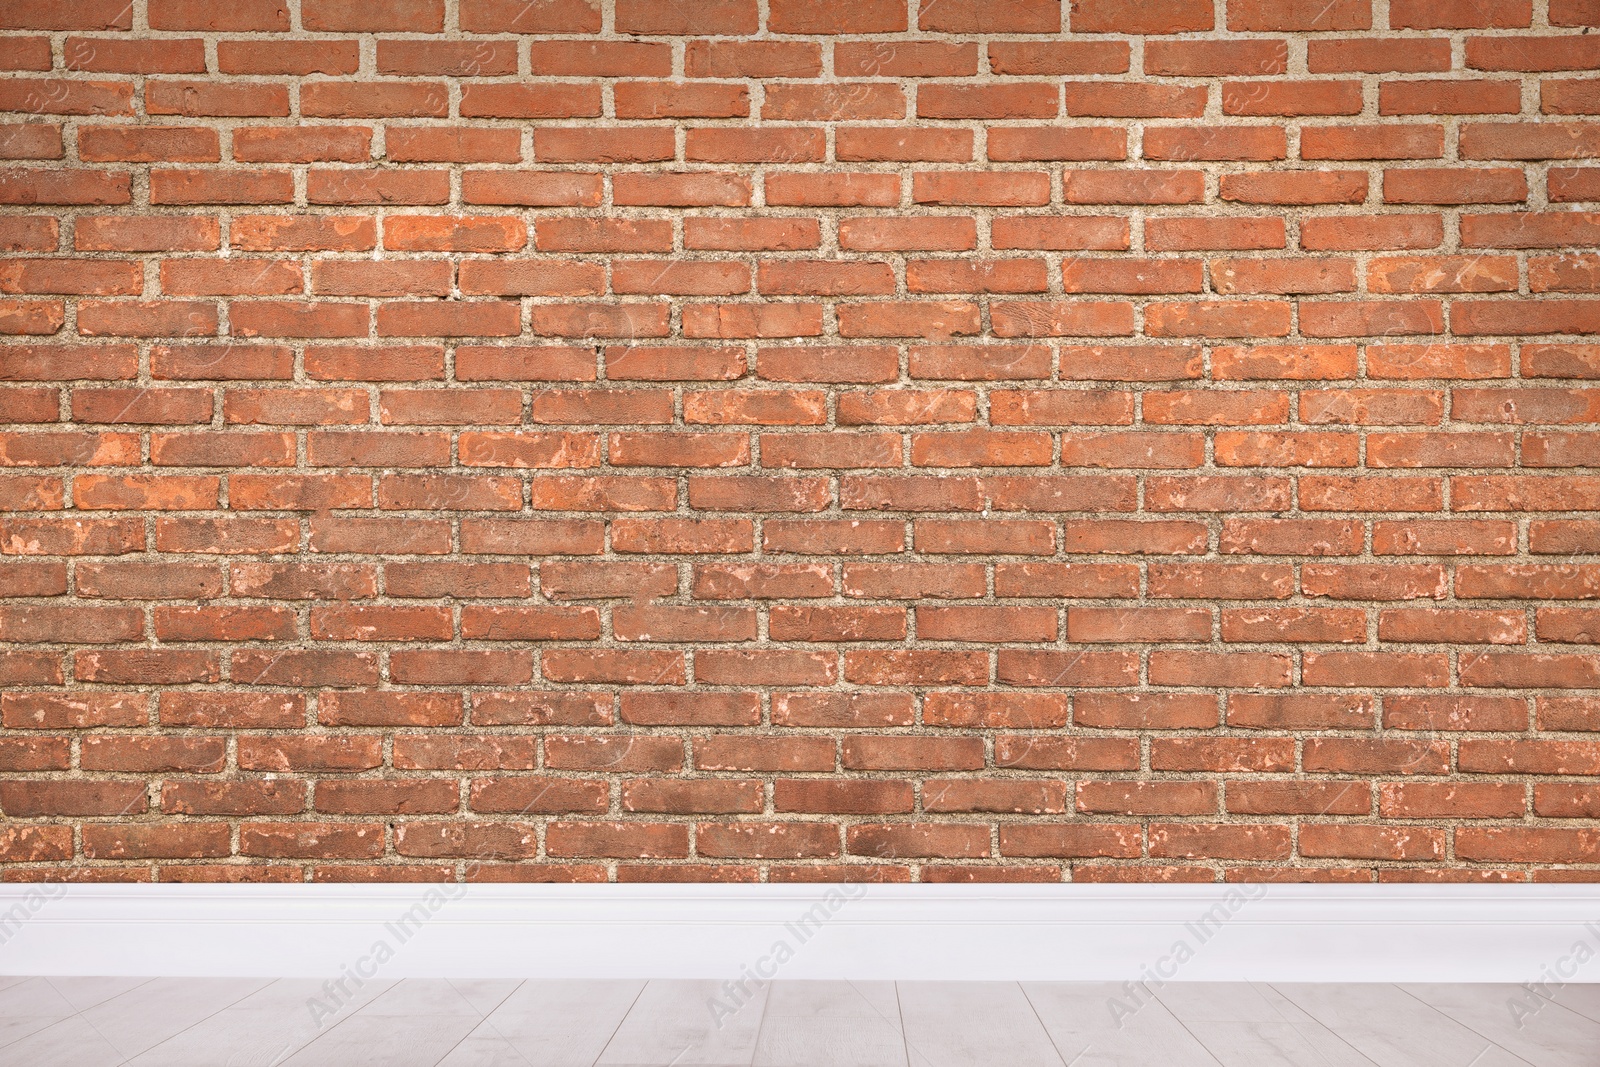 Image of Room with brick wall and wooden floor